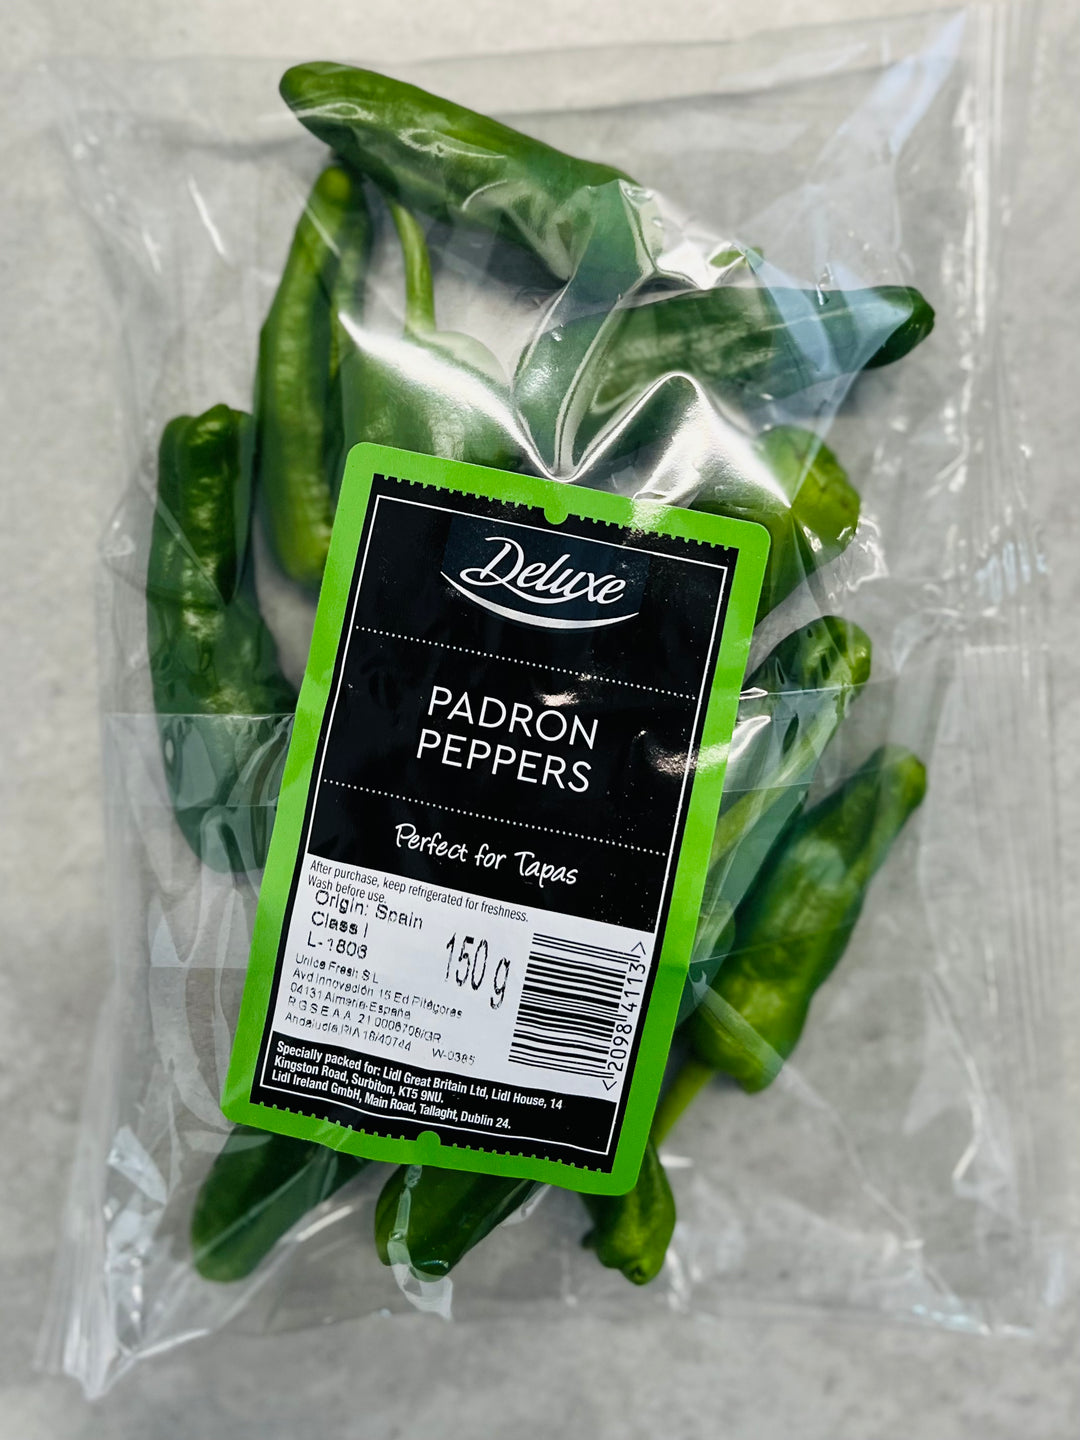 DELUXE Padron Peppers 150g